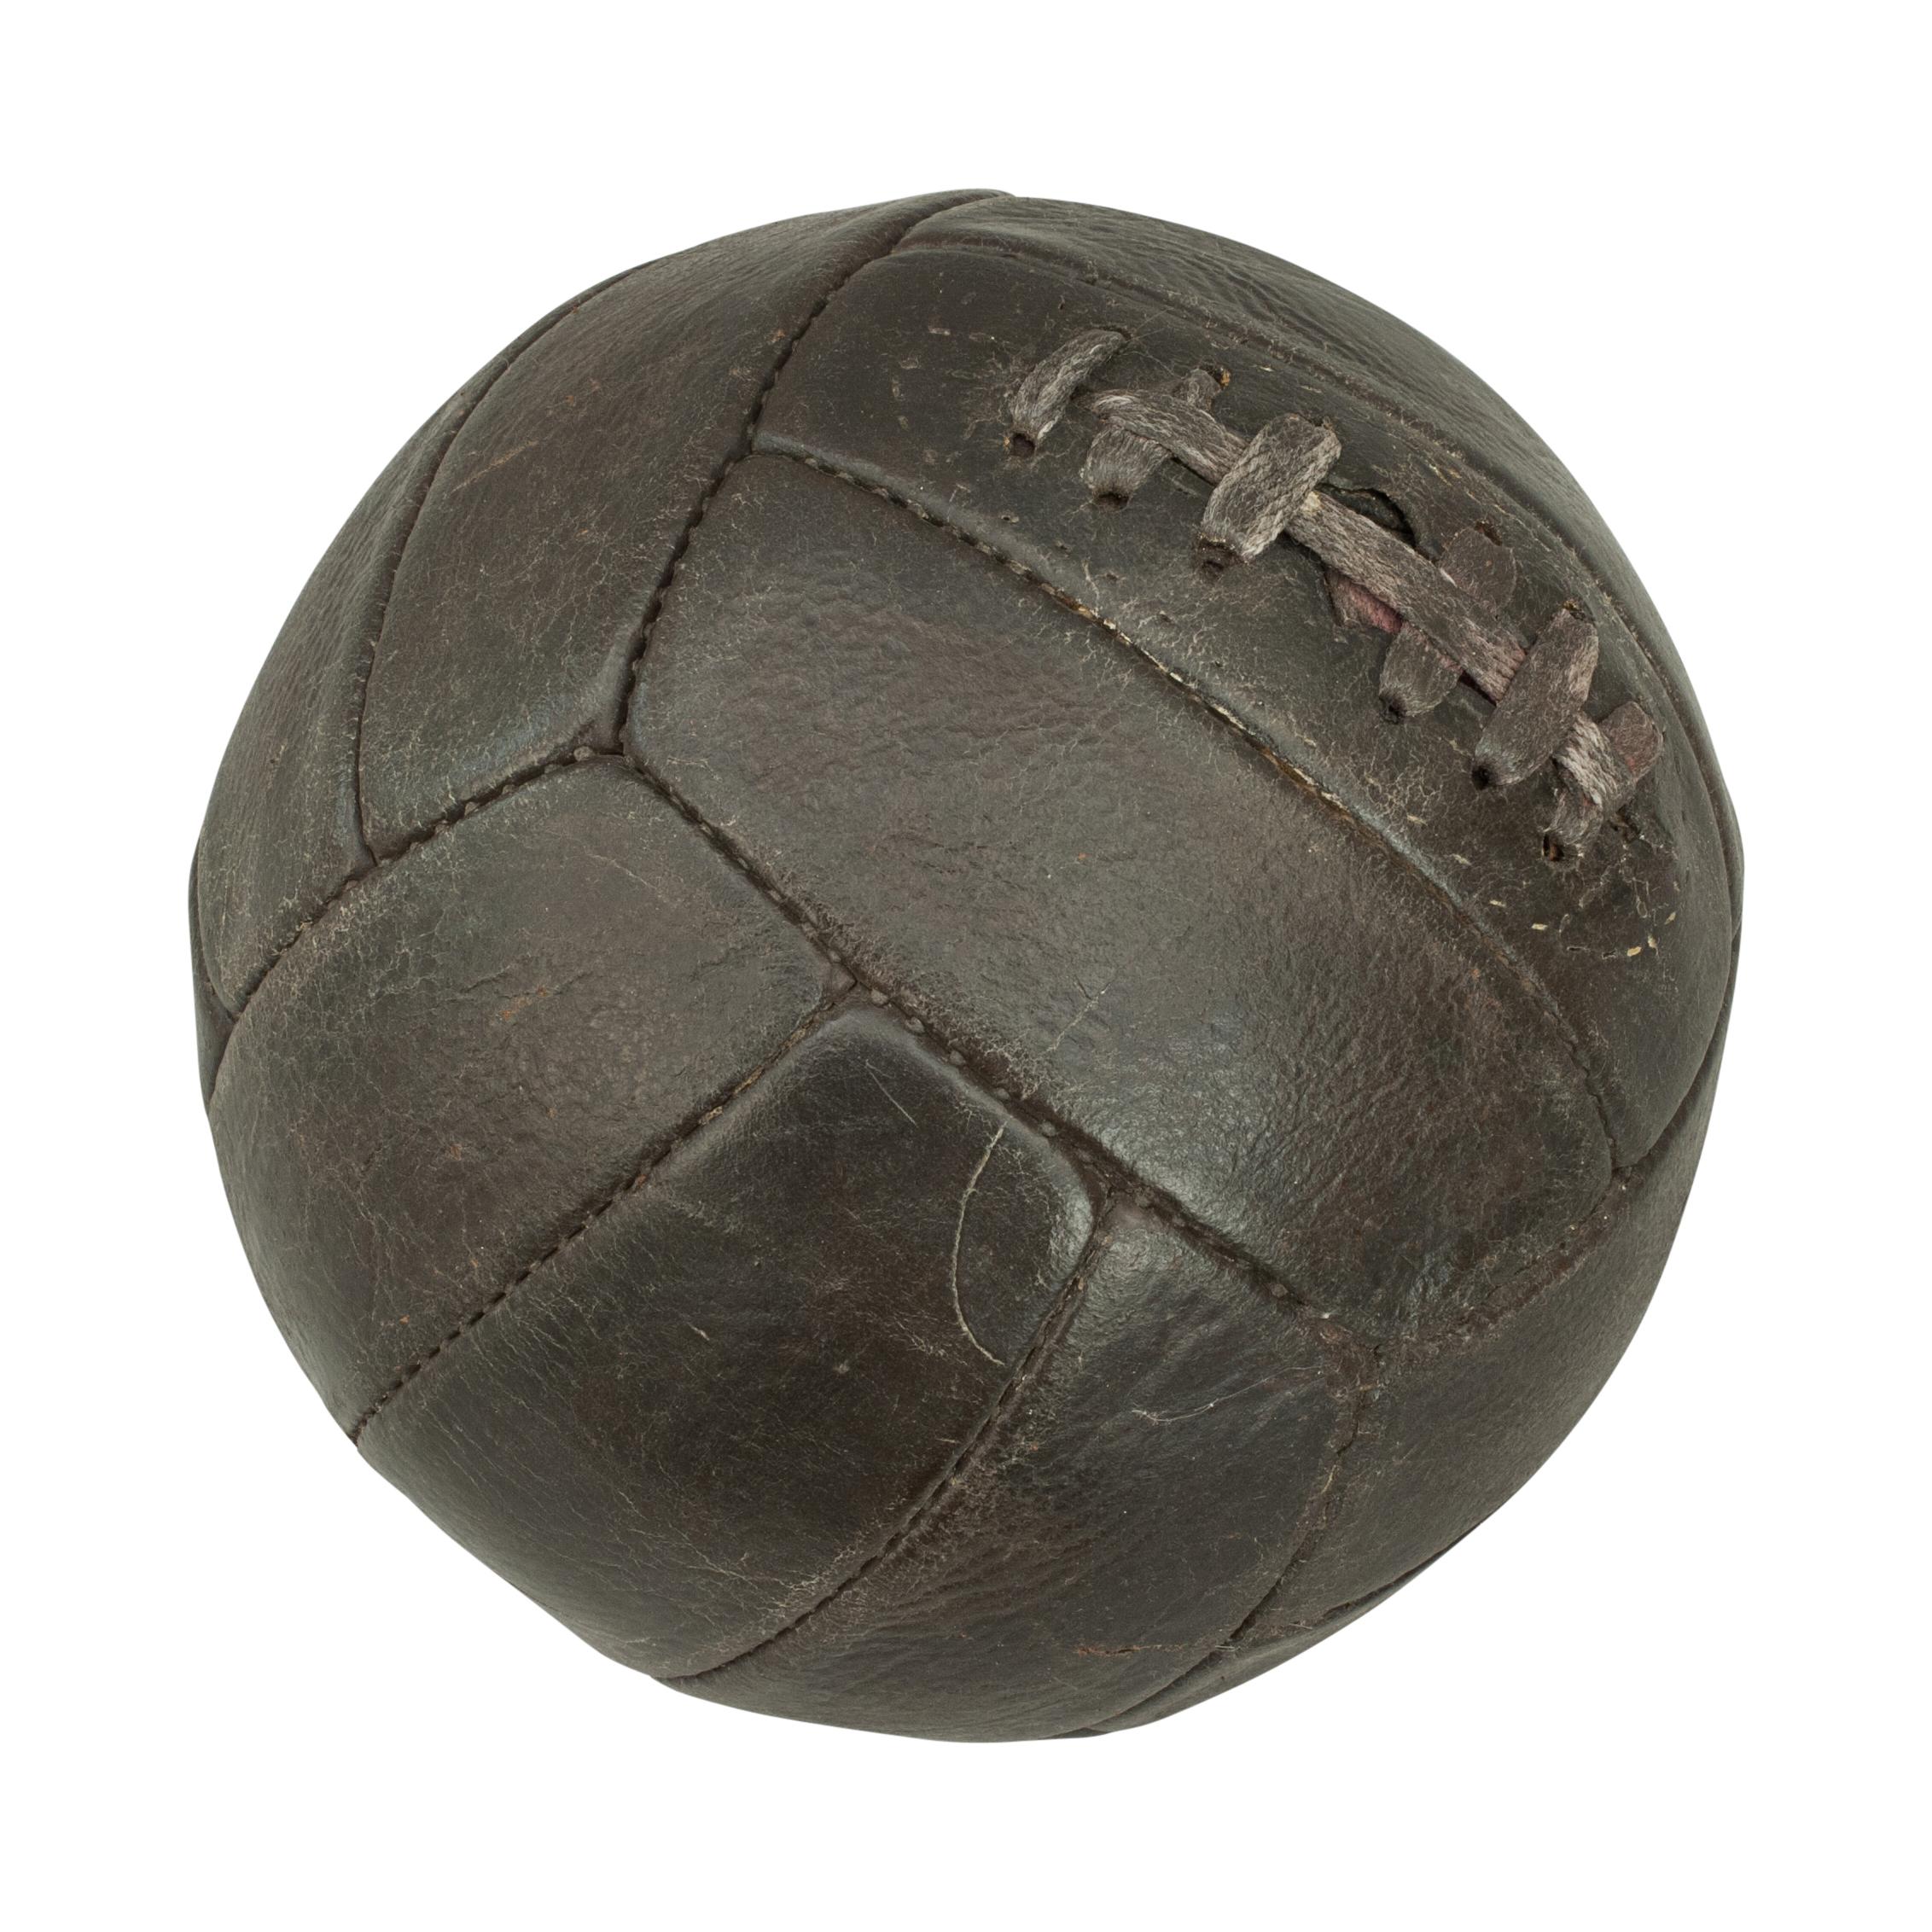 Vintage leather football.
A traditional 18-panel leather football in good condition. The ball has a lace-up slit to the top to enable bladder inflation.